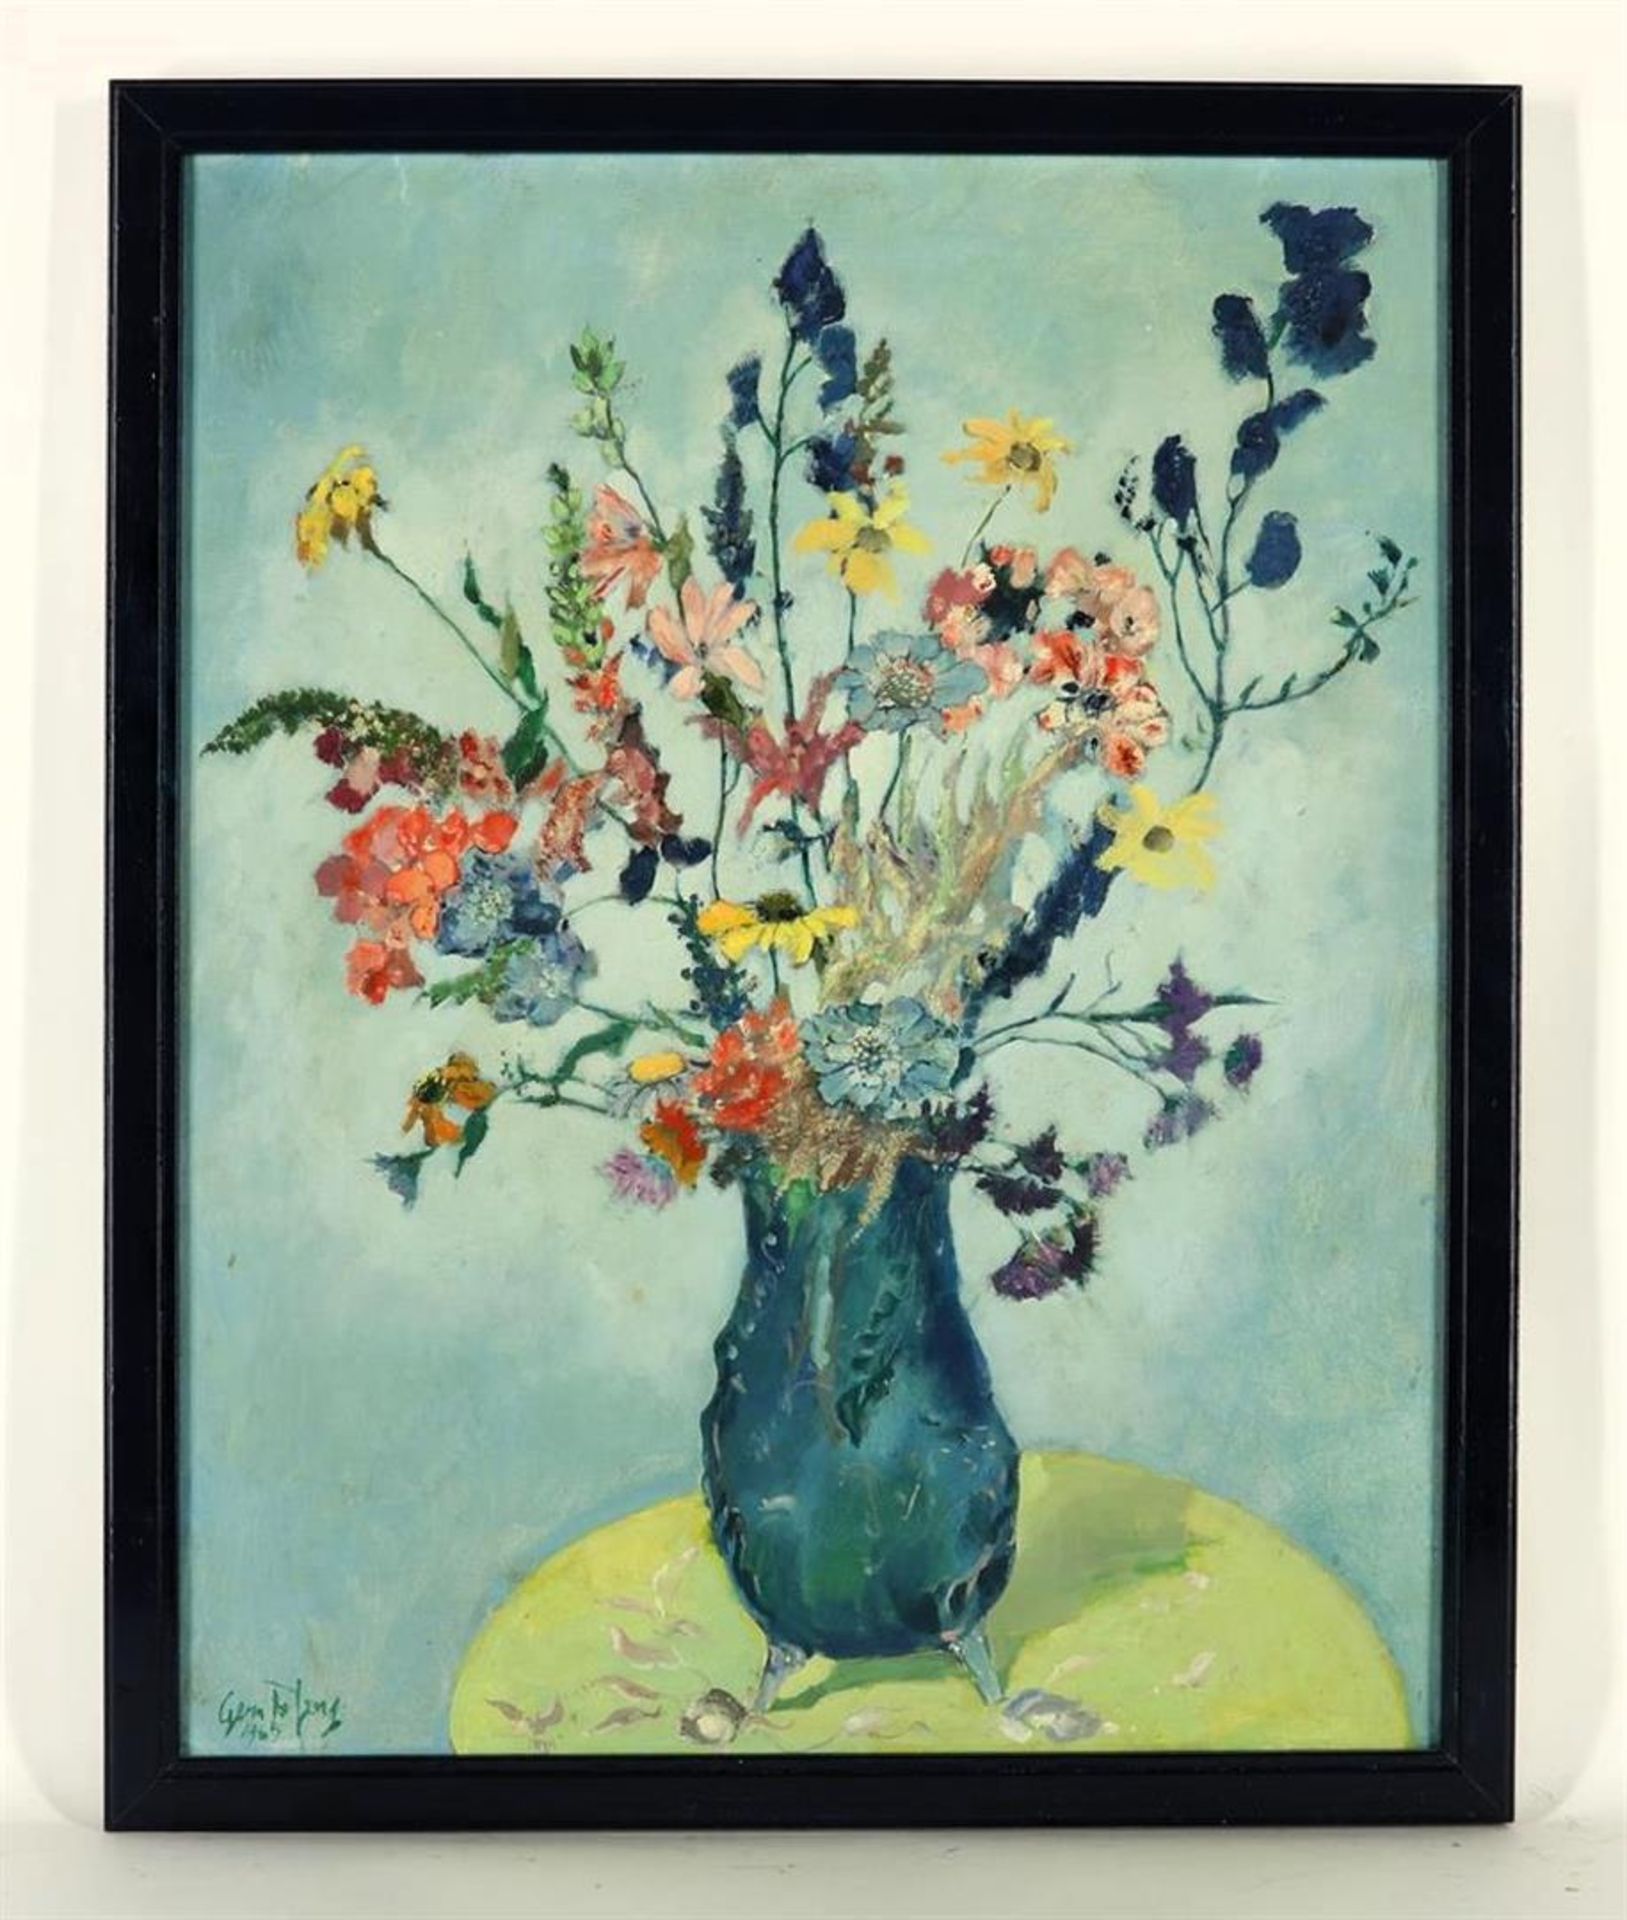 Germ de Jong (1886-1967) Flower still life, titled verso: "the decorated vase" signed and dated 1965 - Image 2 of 4